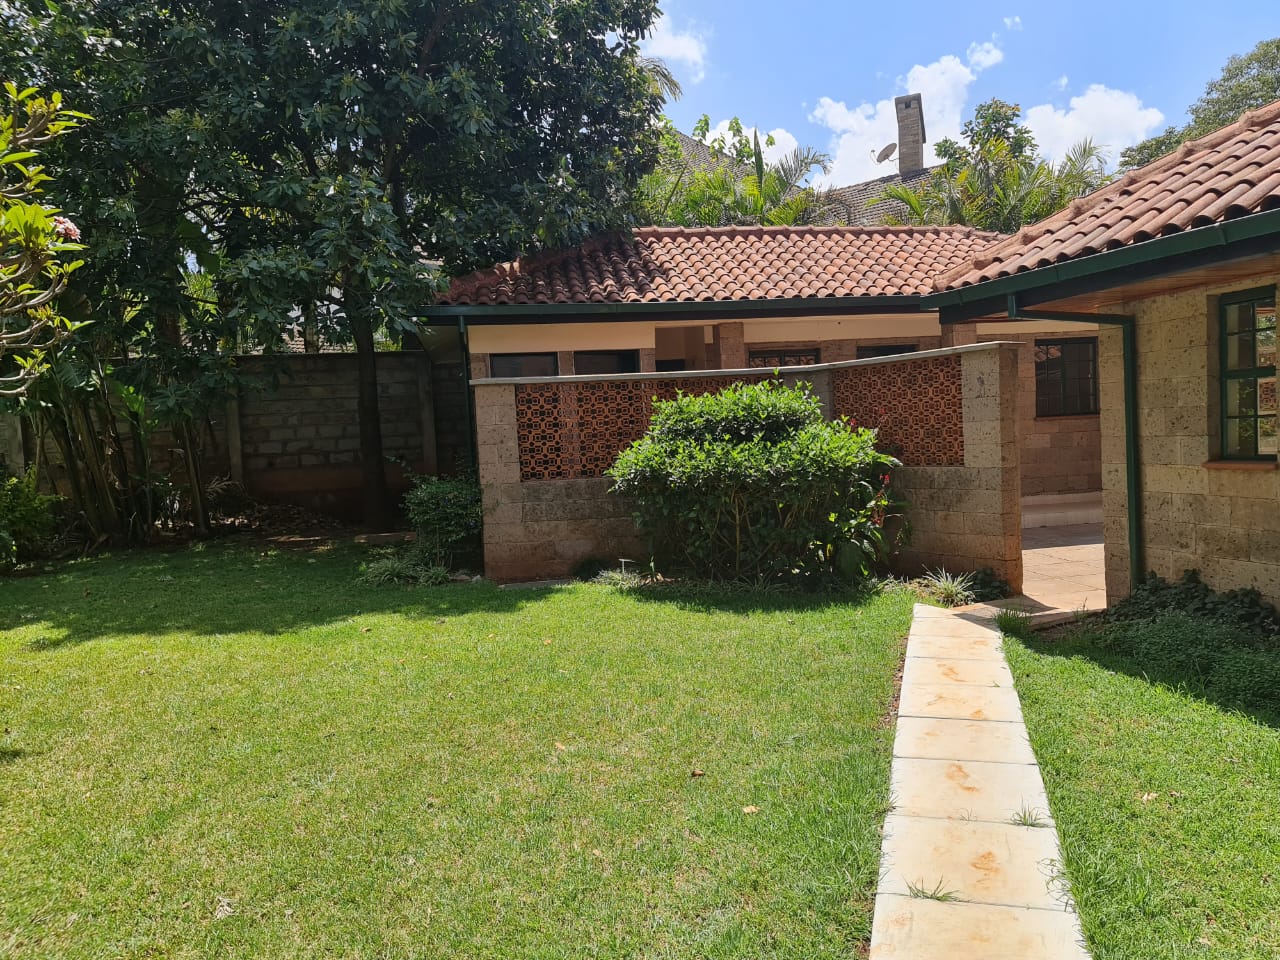 5 Bedrooms House in a gated community of 12 units in Lower kabete for rent at Ksh400k negotiable (2)